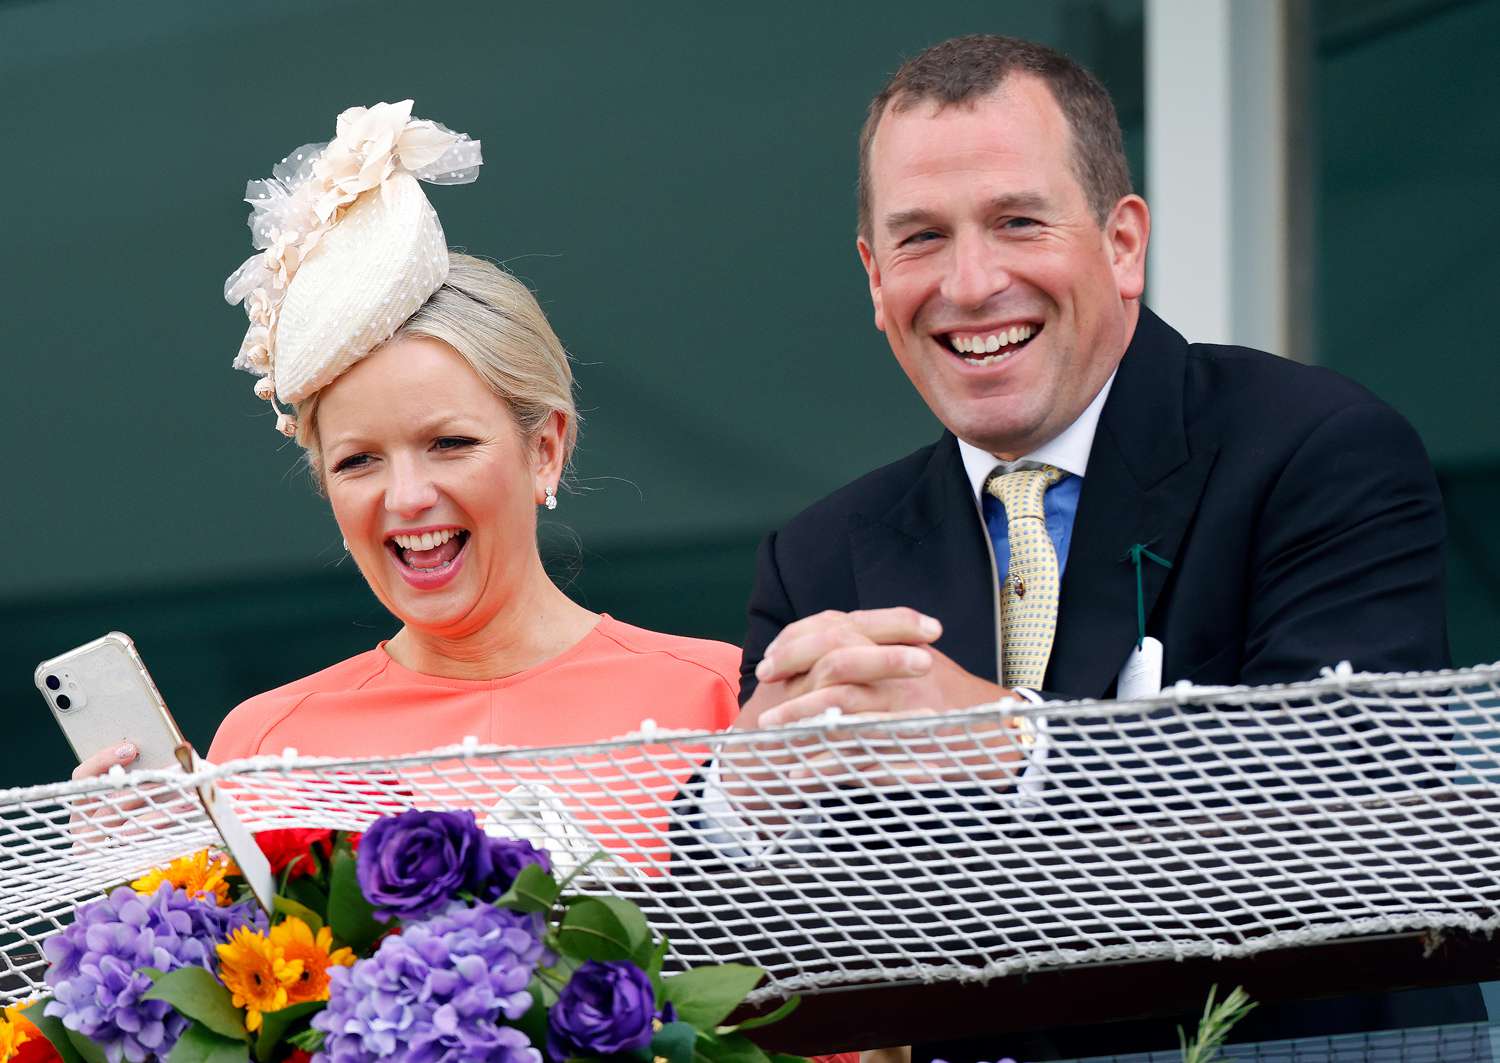 Lindsay Wallace and Peter Phillips watch the racing from the royal box as they attend The Epsom Derby at Epsom Racecourse on June 4, 2022 in Epsom, England.